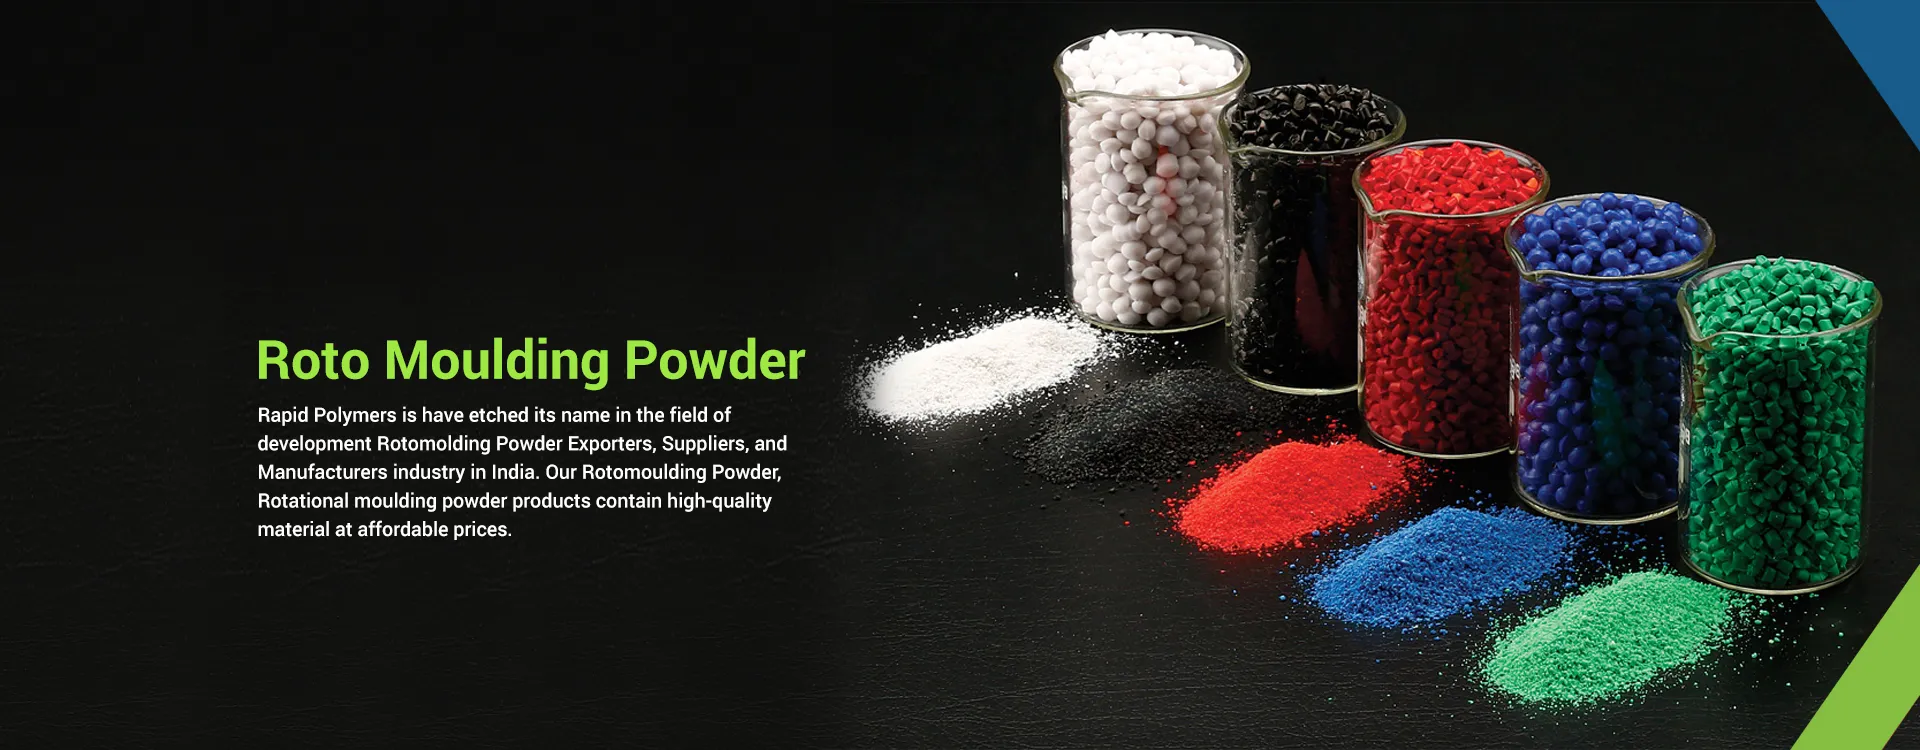 Roto Moulding Powder at best price